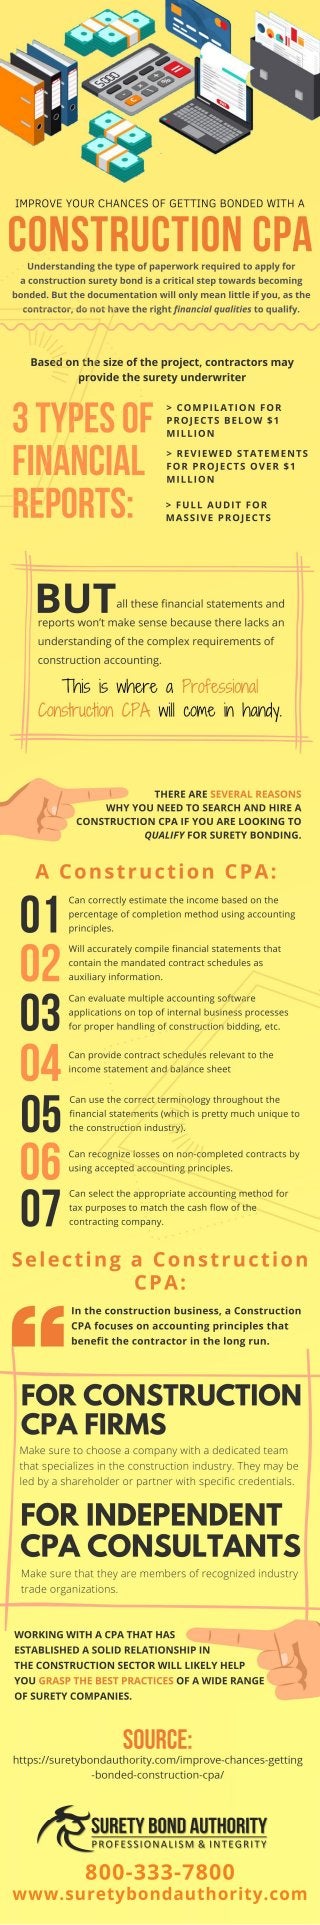 Improve Your Chances of Getting Bonded With a Construction CPA